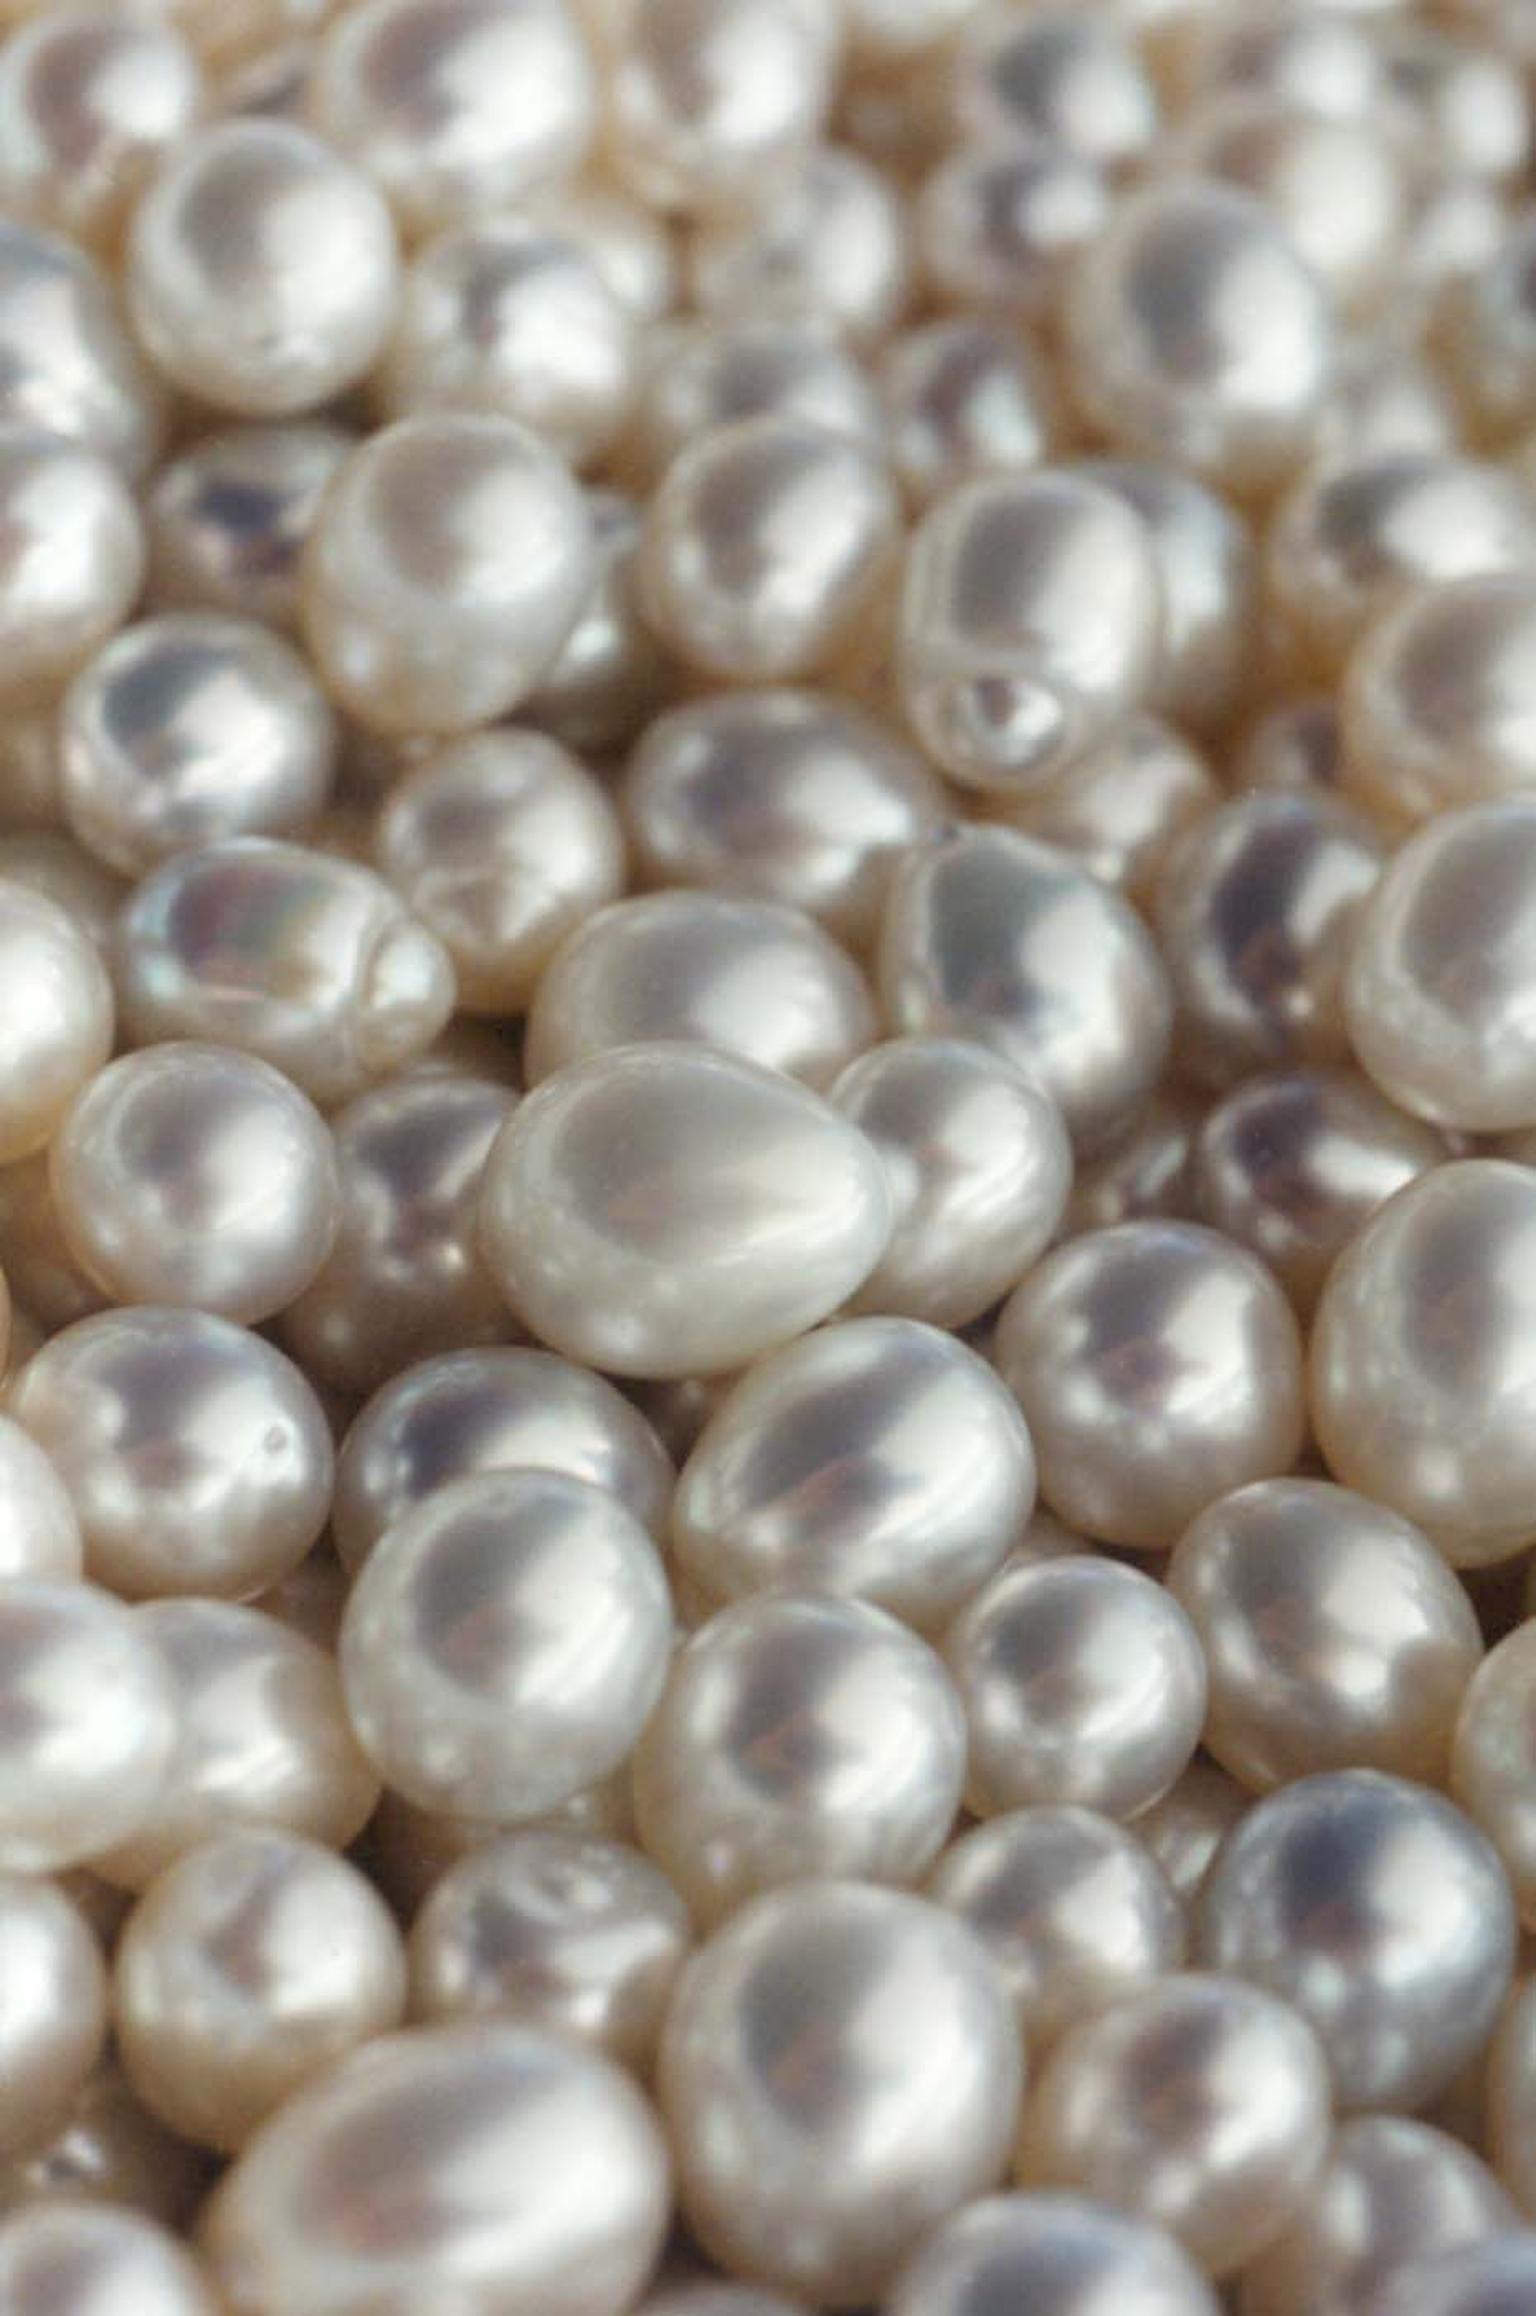 South Sea pearls are extremely rare, spending two silent years within the host oyster. Each pearl chosen by Autore is judged and valued according to the five S's - shine, surface, shade, shape and size.